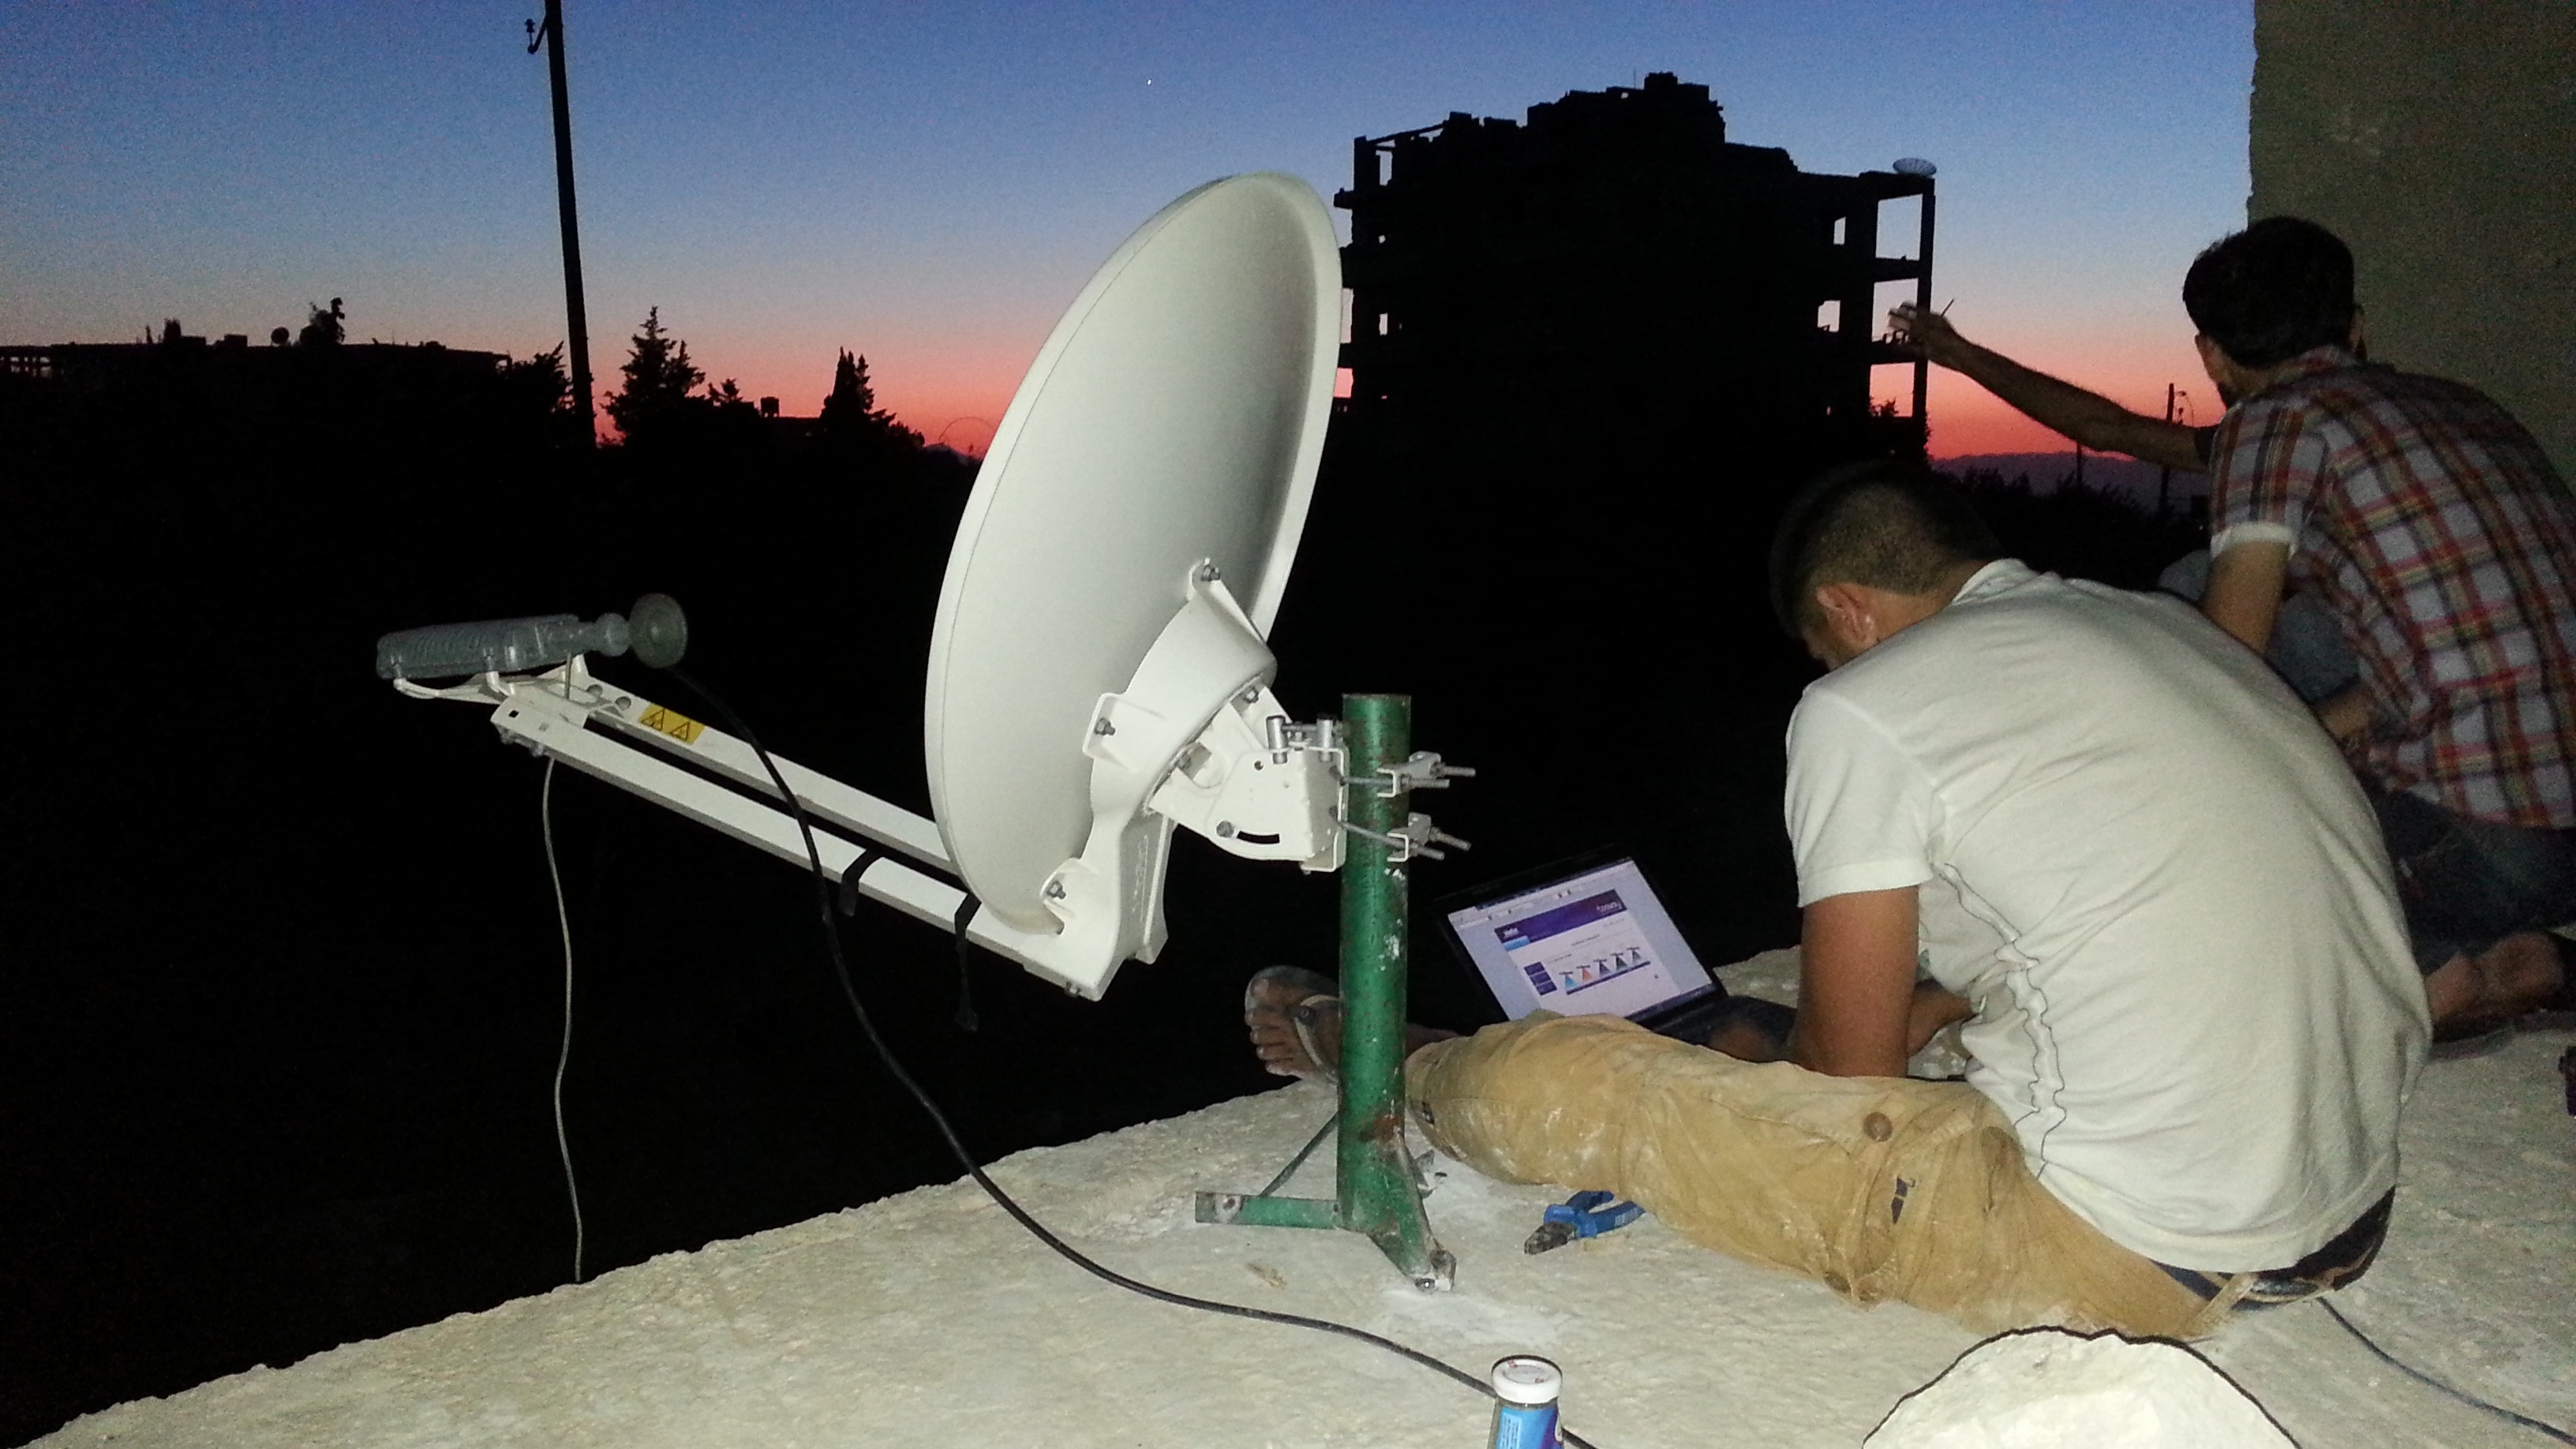 Setting up a new radio station under the cover of night (images published from ASML with permission).